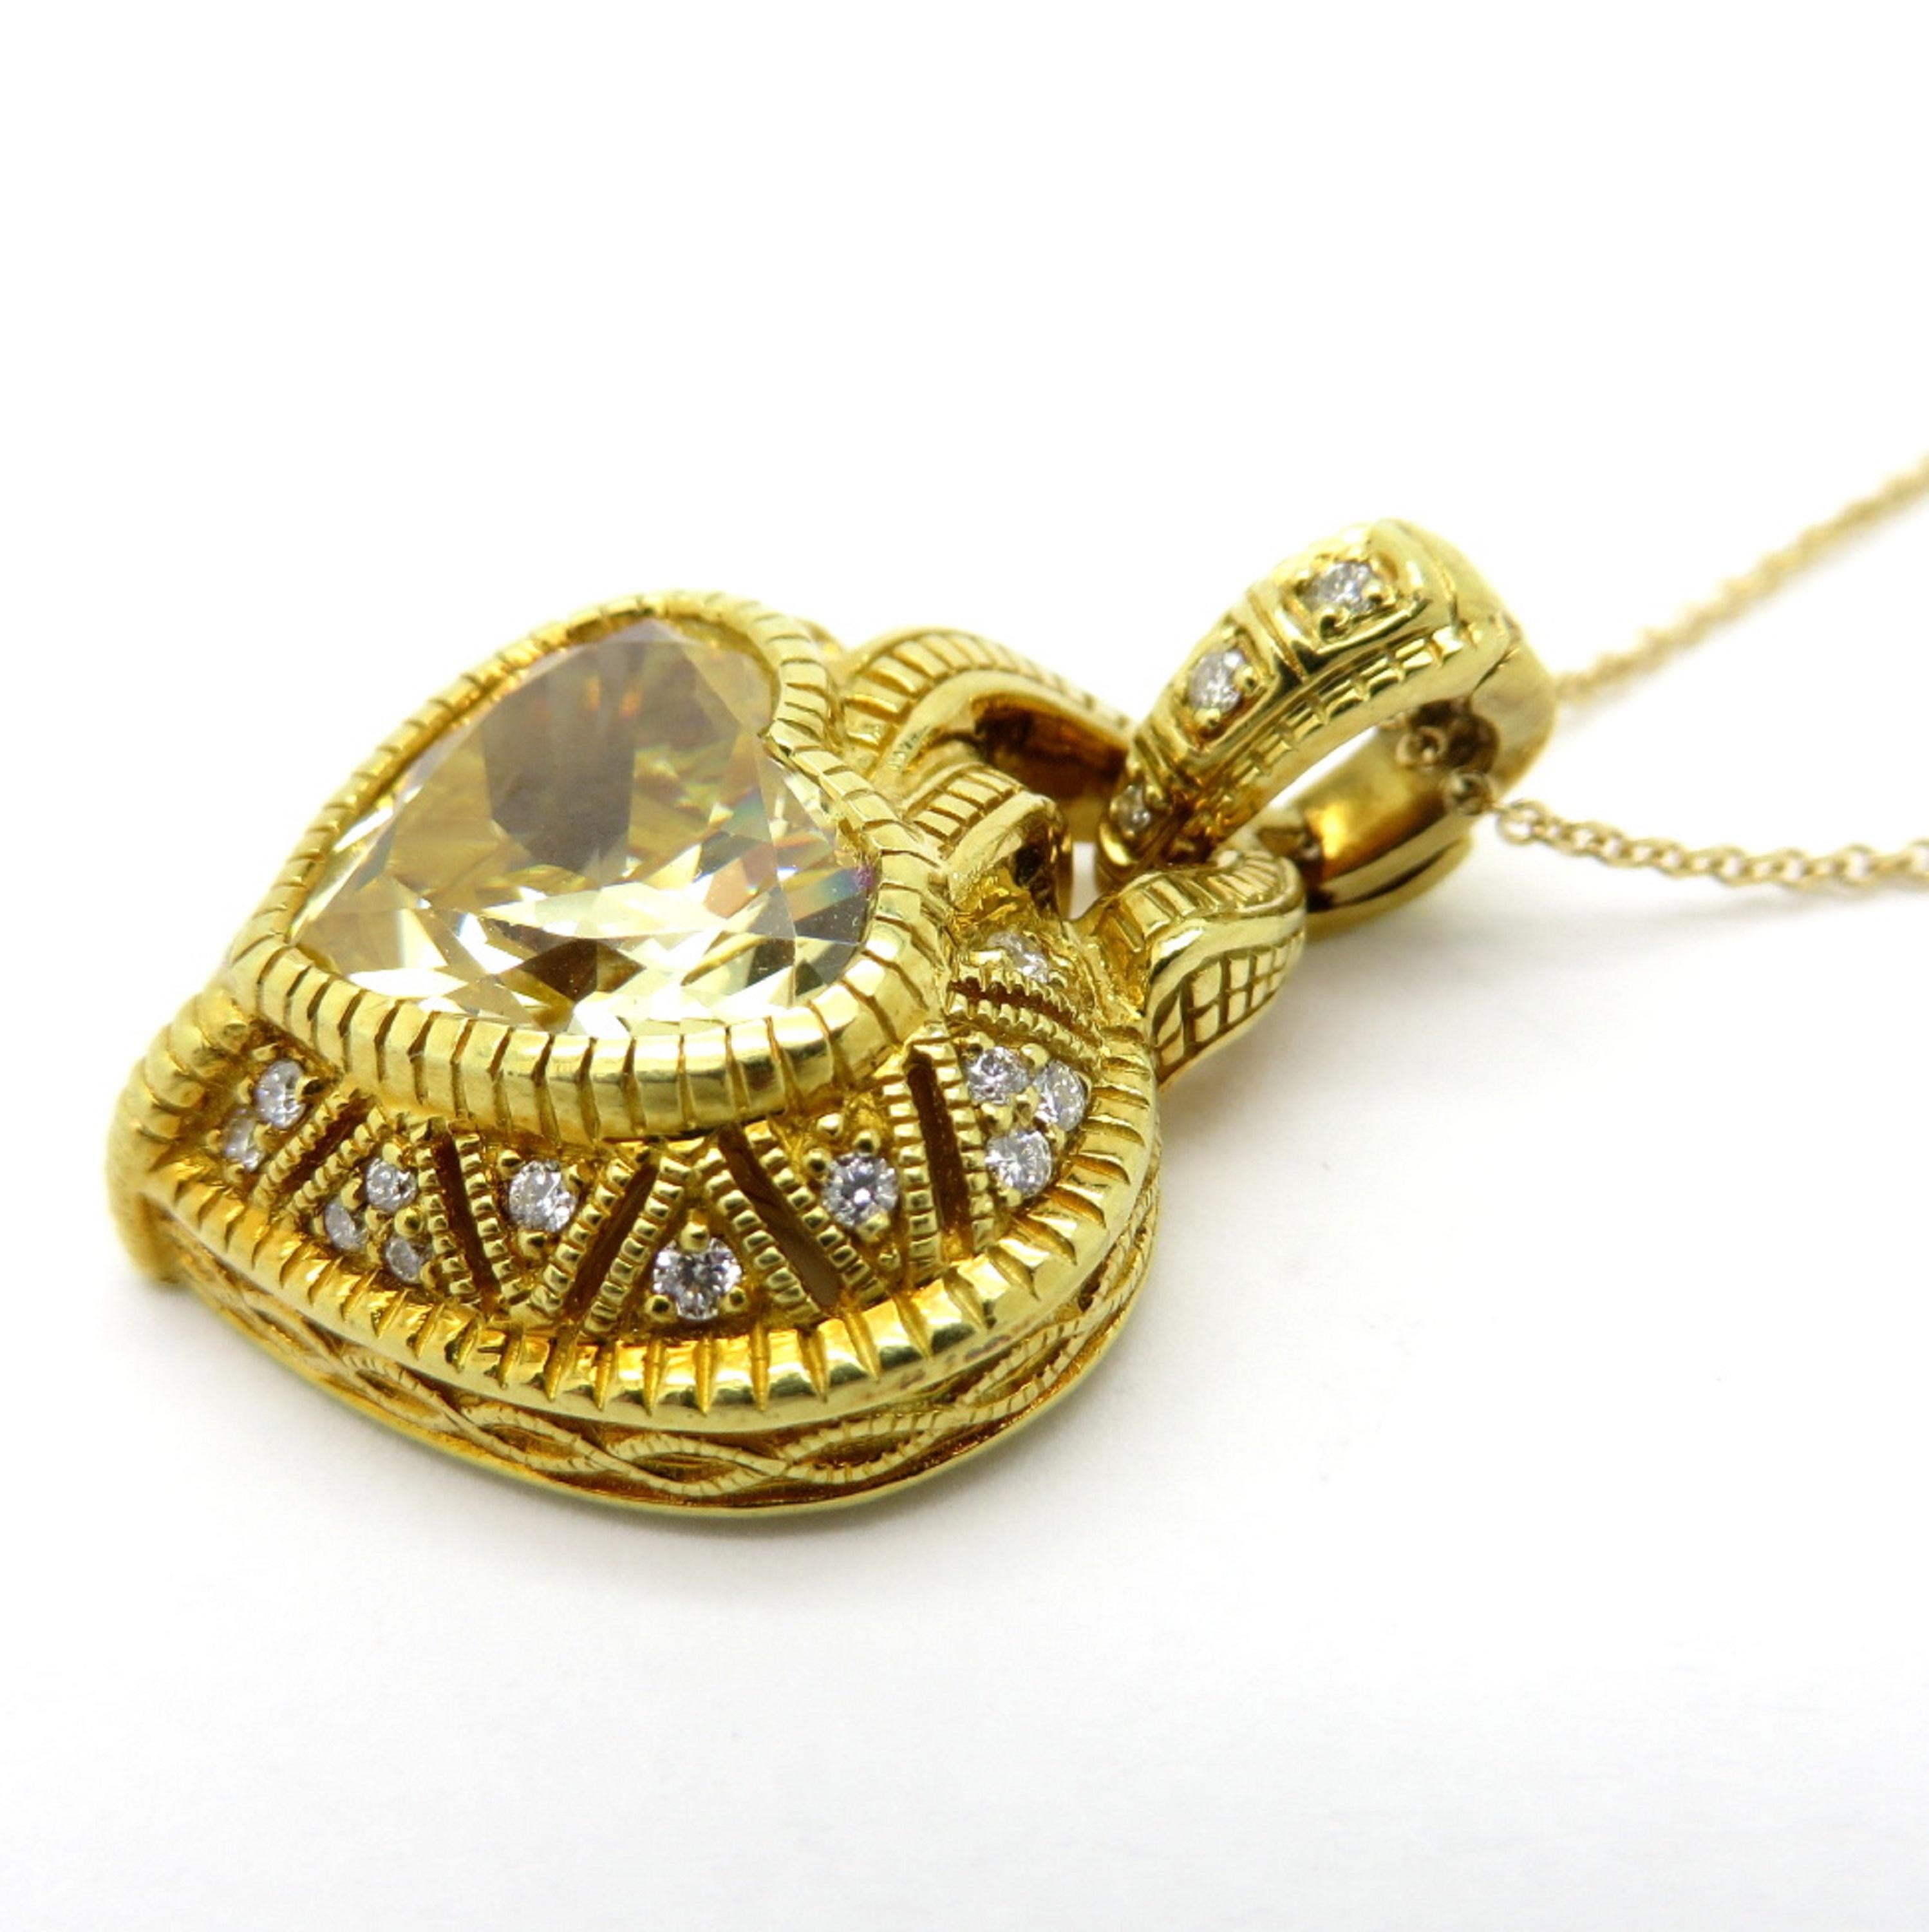 For sale is a designer Judith Ripka canary yellow crystal and diamond heart necklace crafted in 18K Yellow Gold!
Showcasing 27 Round Brilliant Cut diamonds, weighing 0.25 carats total.
The chain measures 18” inches long.  It is secured by a round